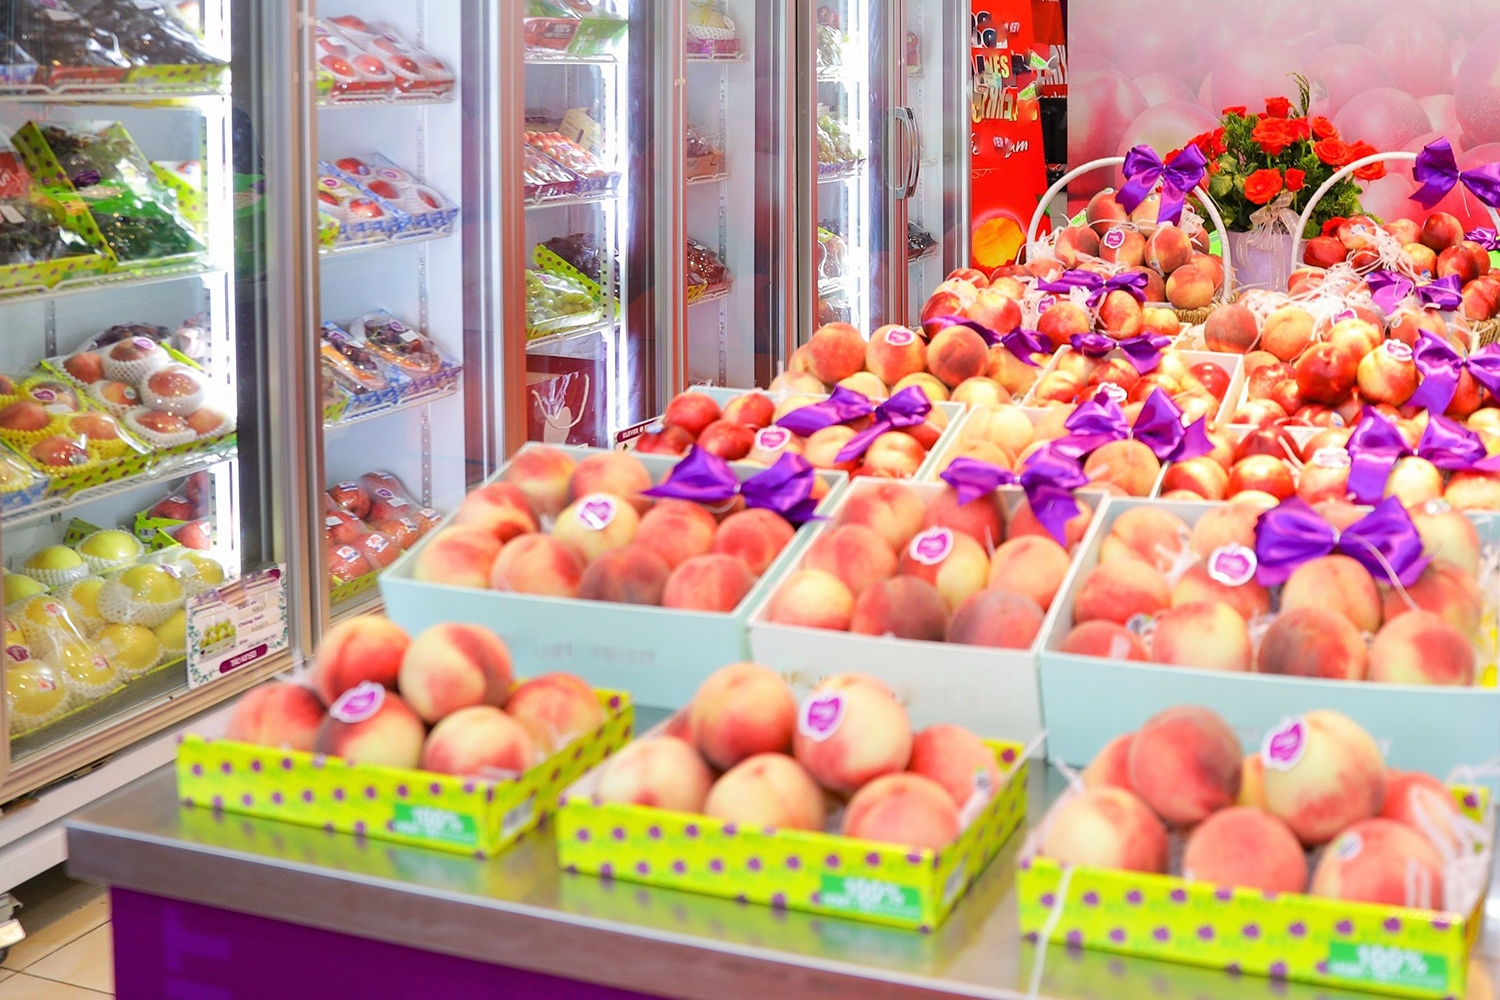 Peaches and nectarines on display in a store